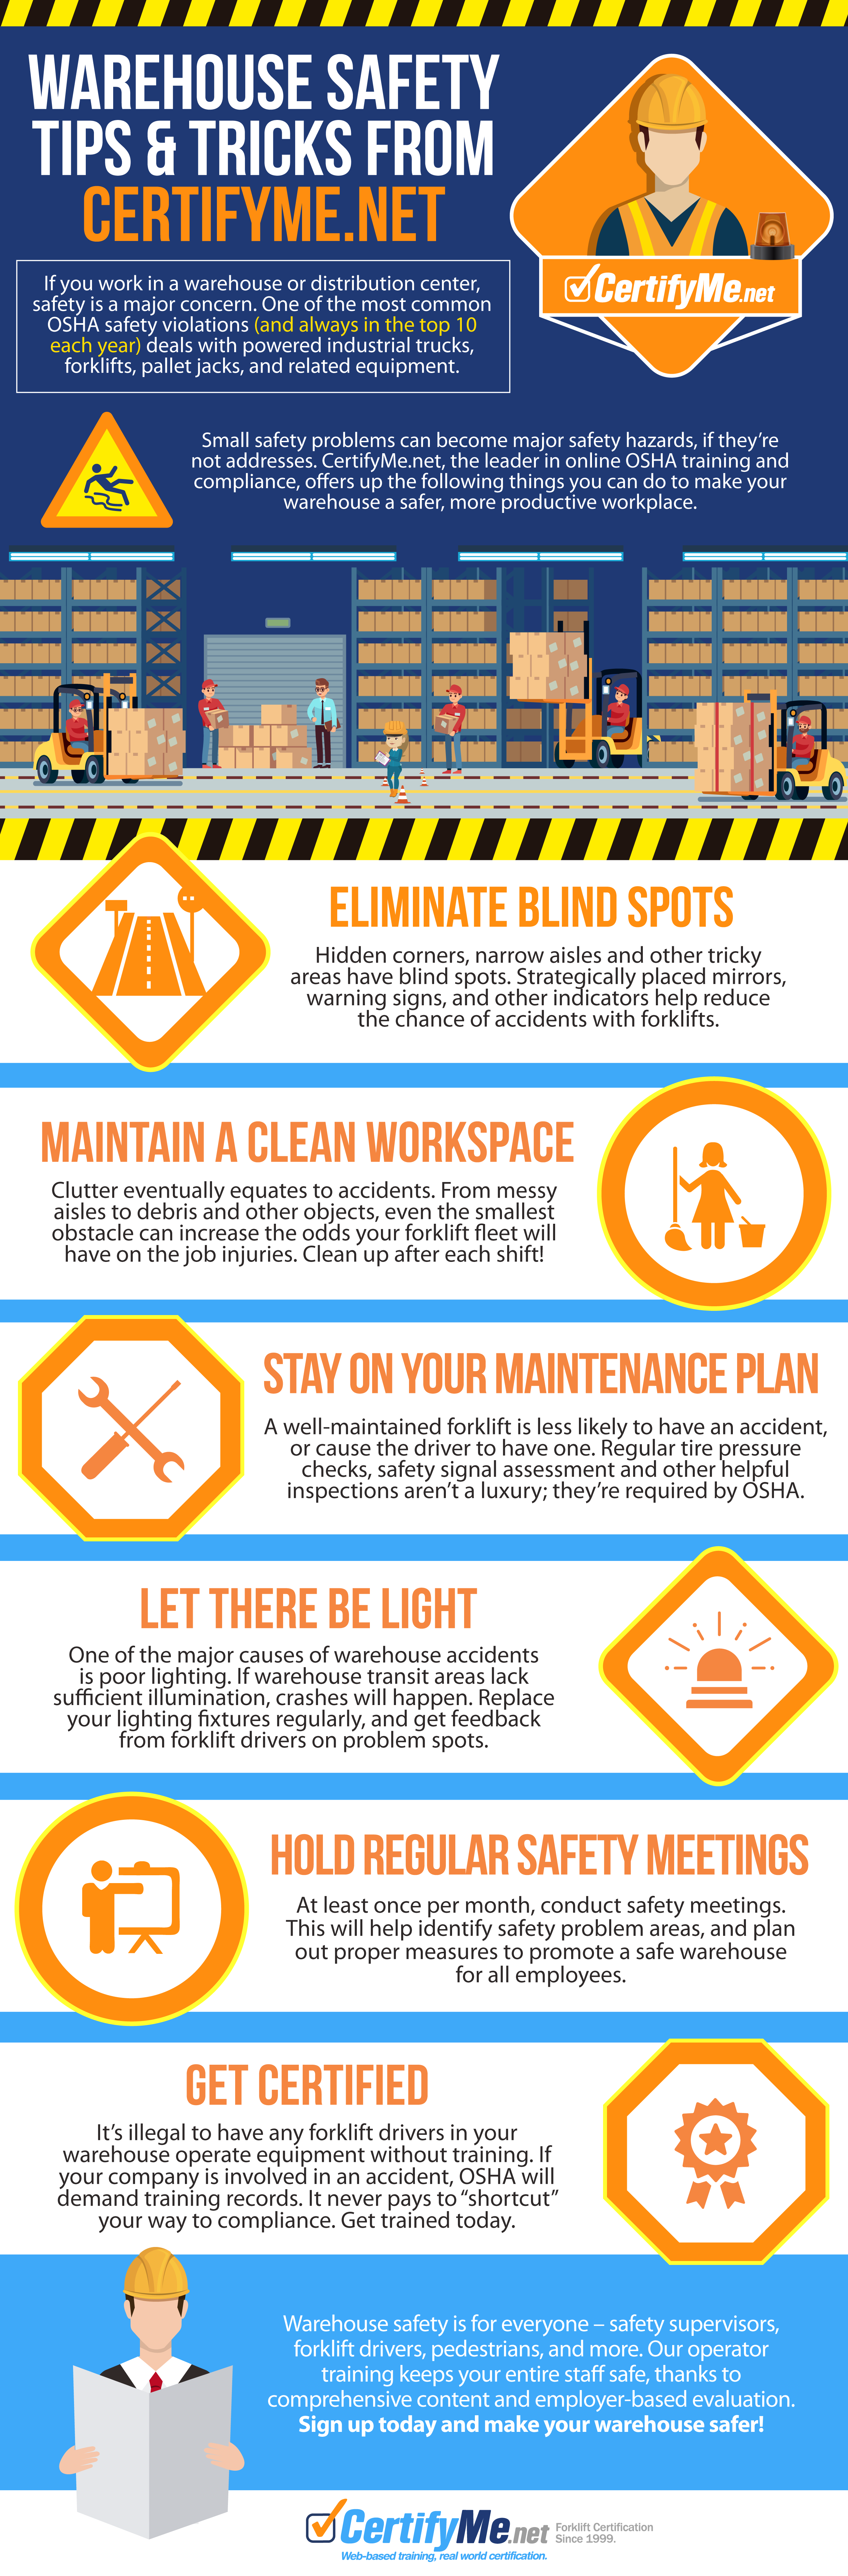 Workplace Safety Tips In Manufacturing #infographic - Visualistan